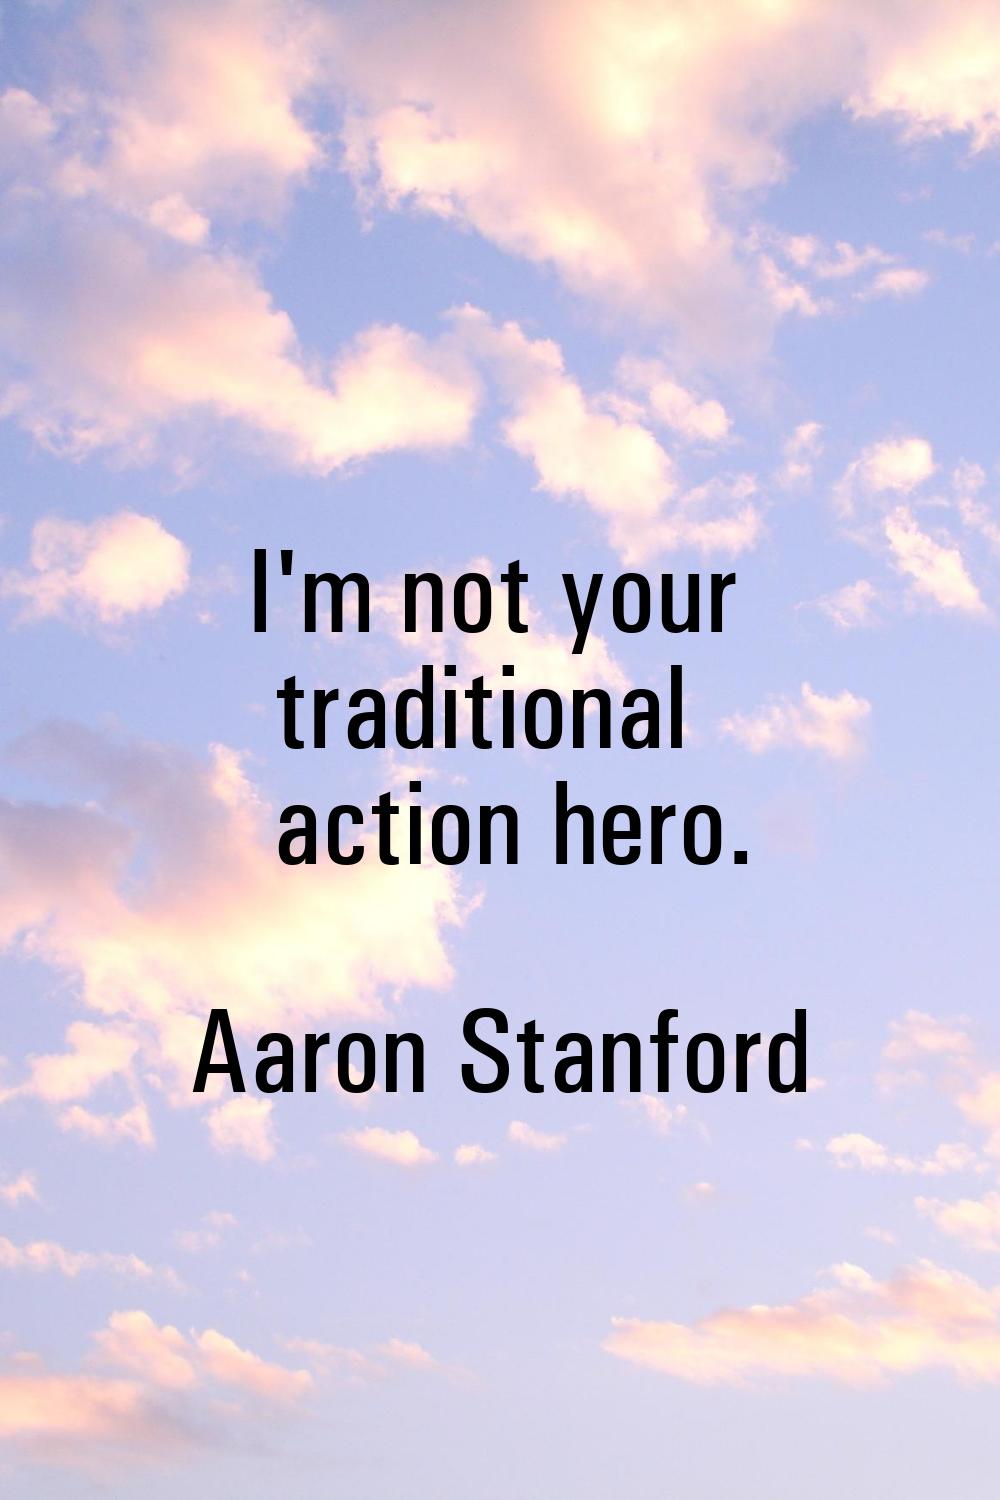 I'm not your traditional action hero.